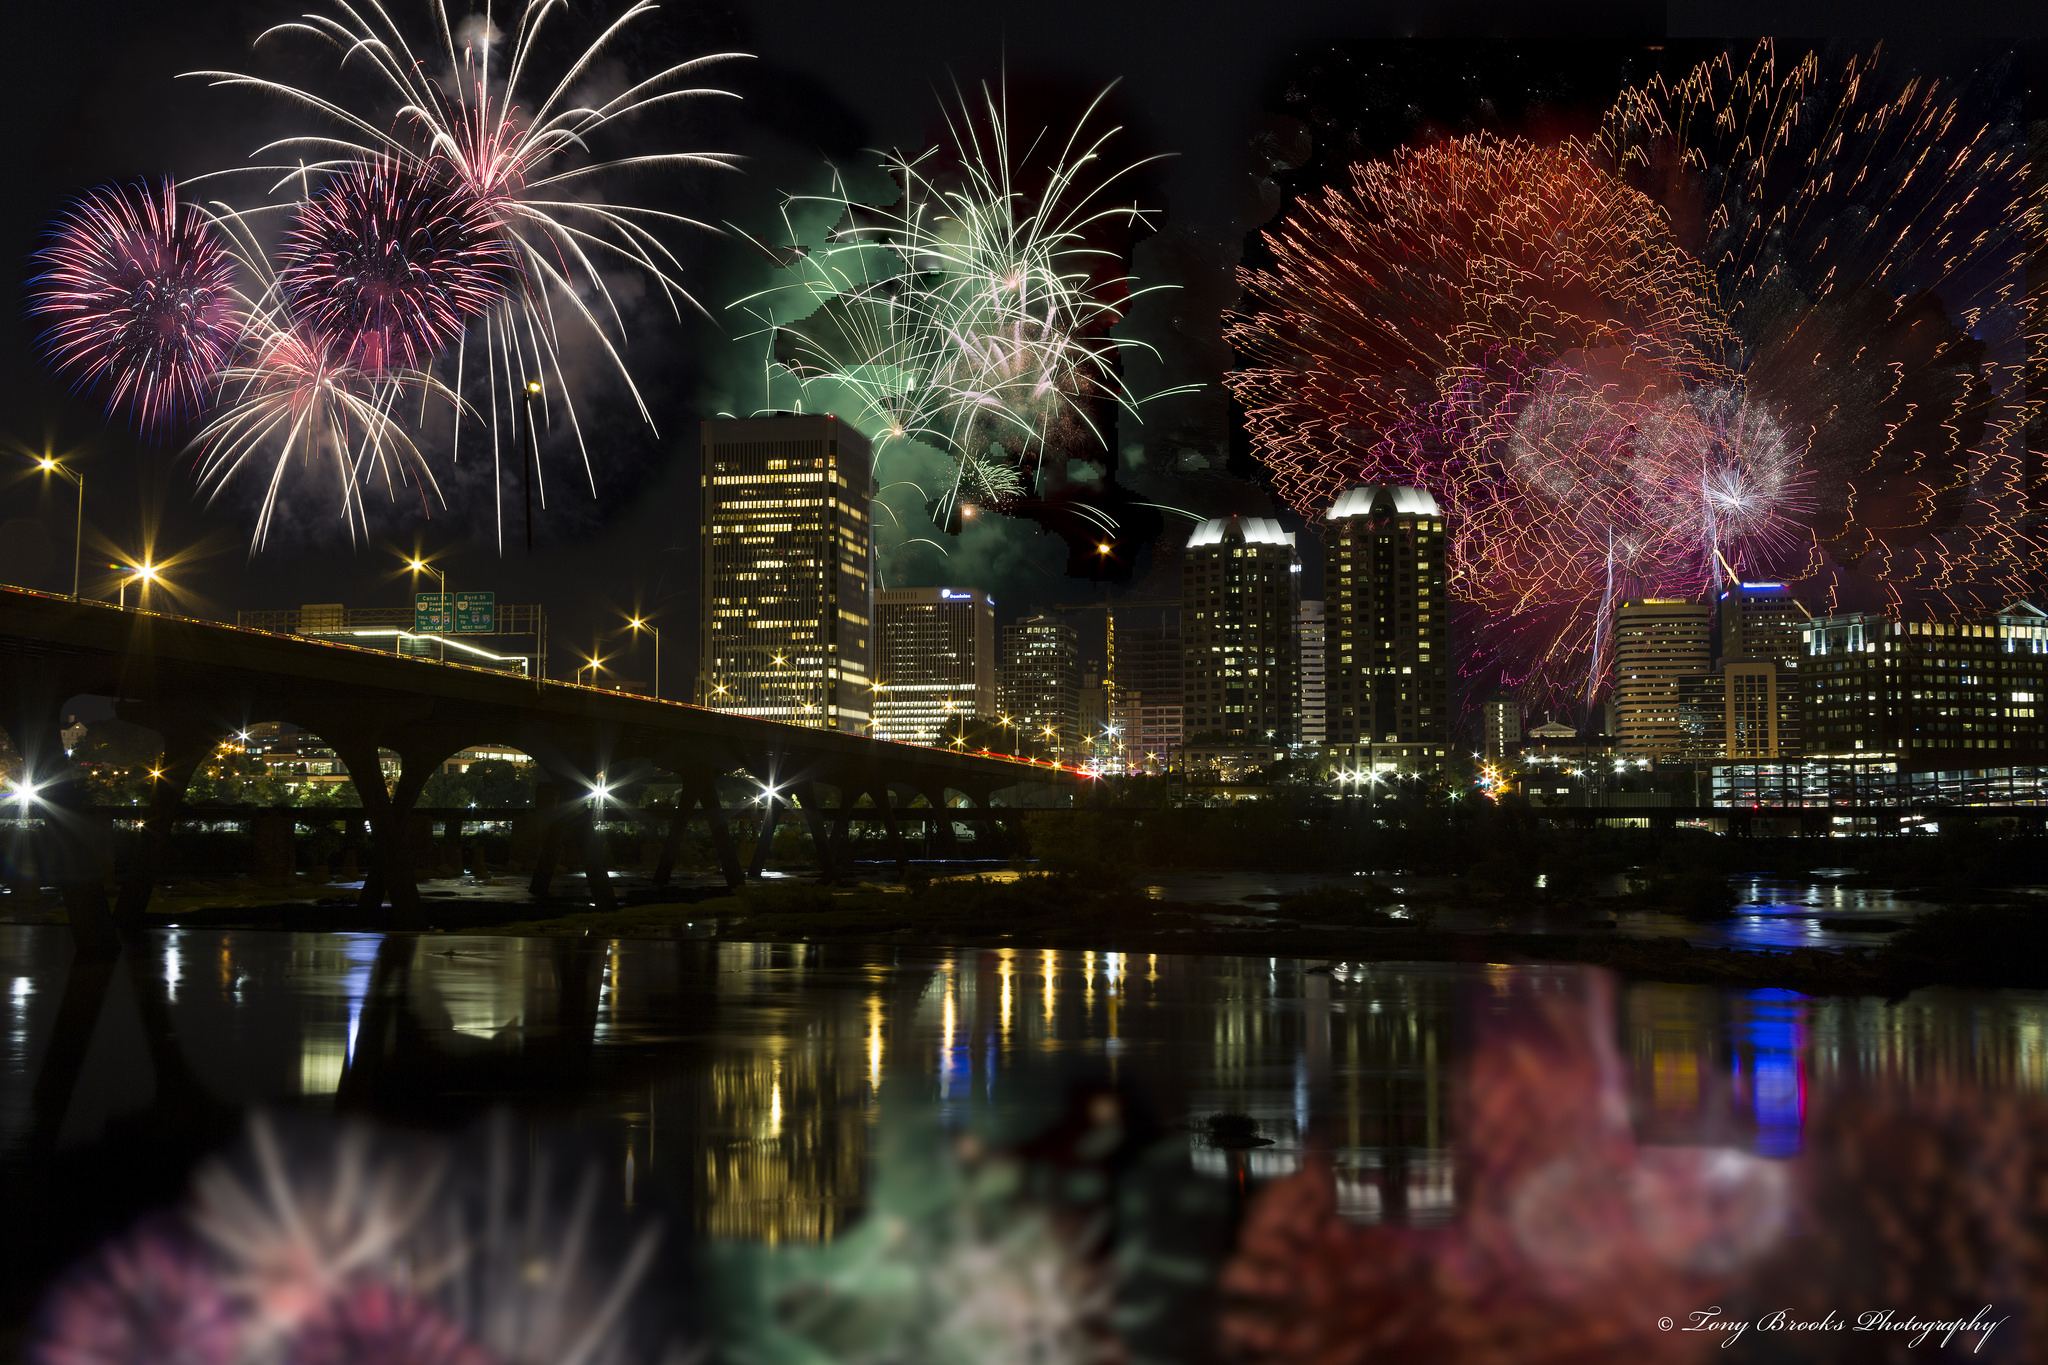 34 Epic Fireworks Shows In Virginia That Will Blow You Away